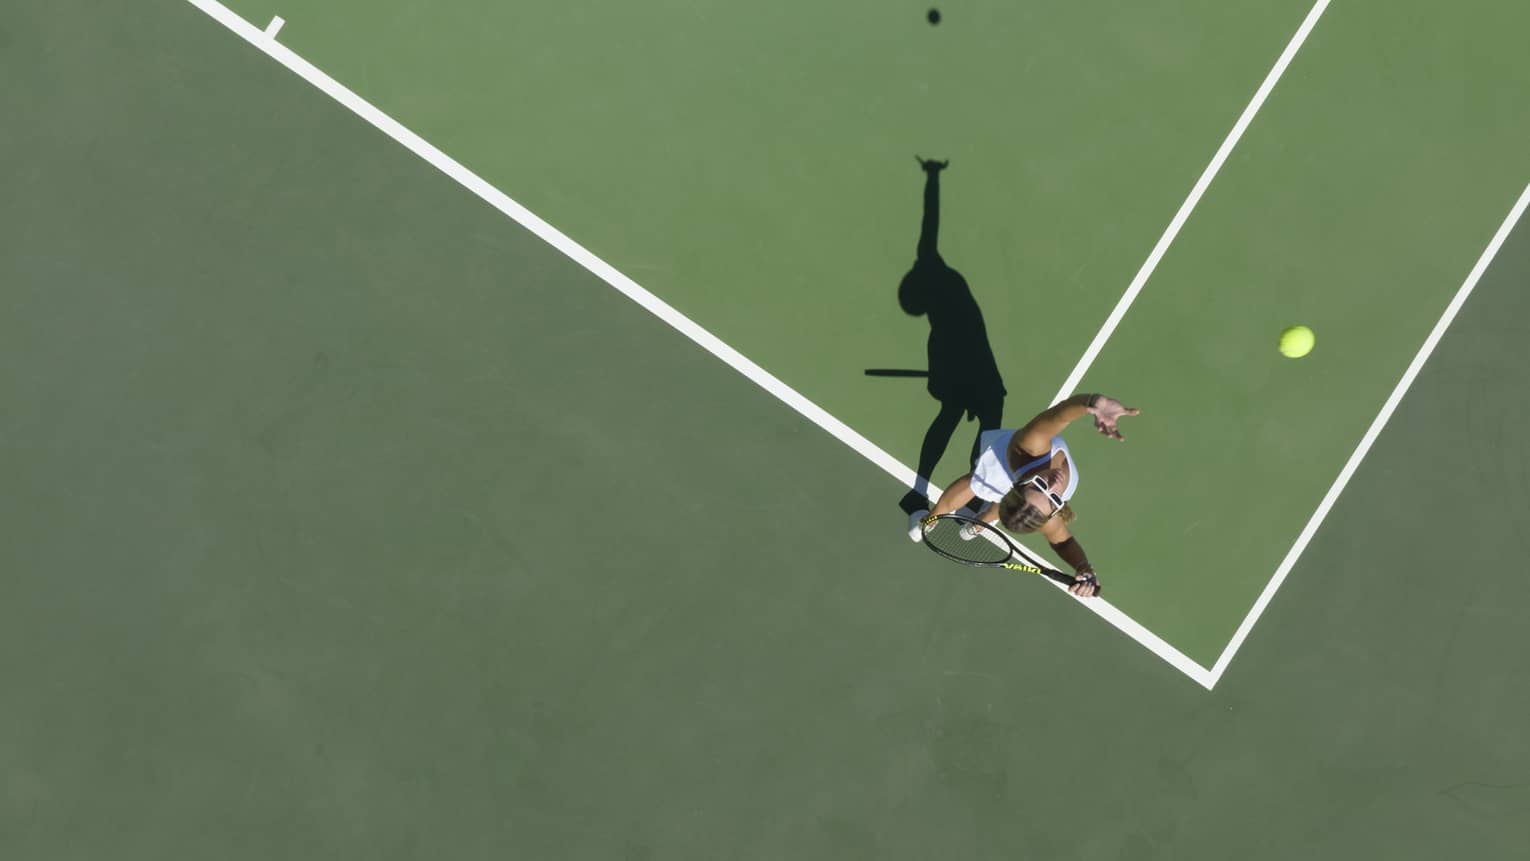 Aerial view of a tennis player mid serve